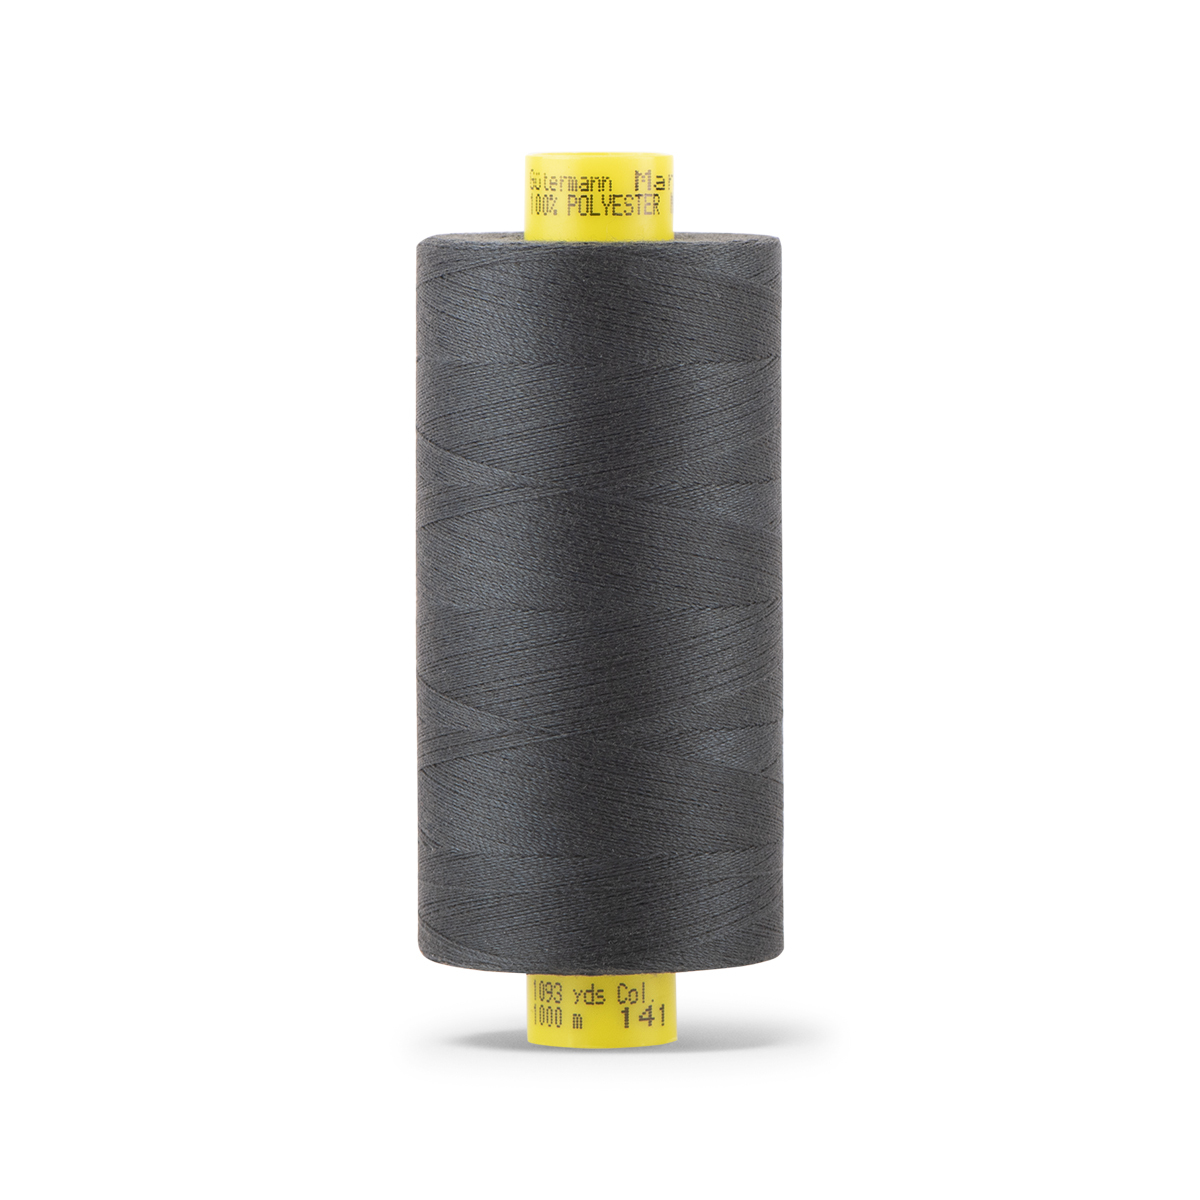 3 Gray GUTERMANN 100% cotton hand thread for Quilting 220 yard Spools